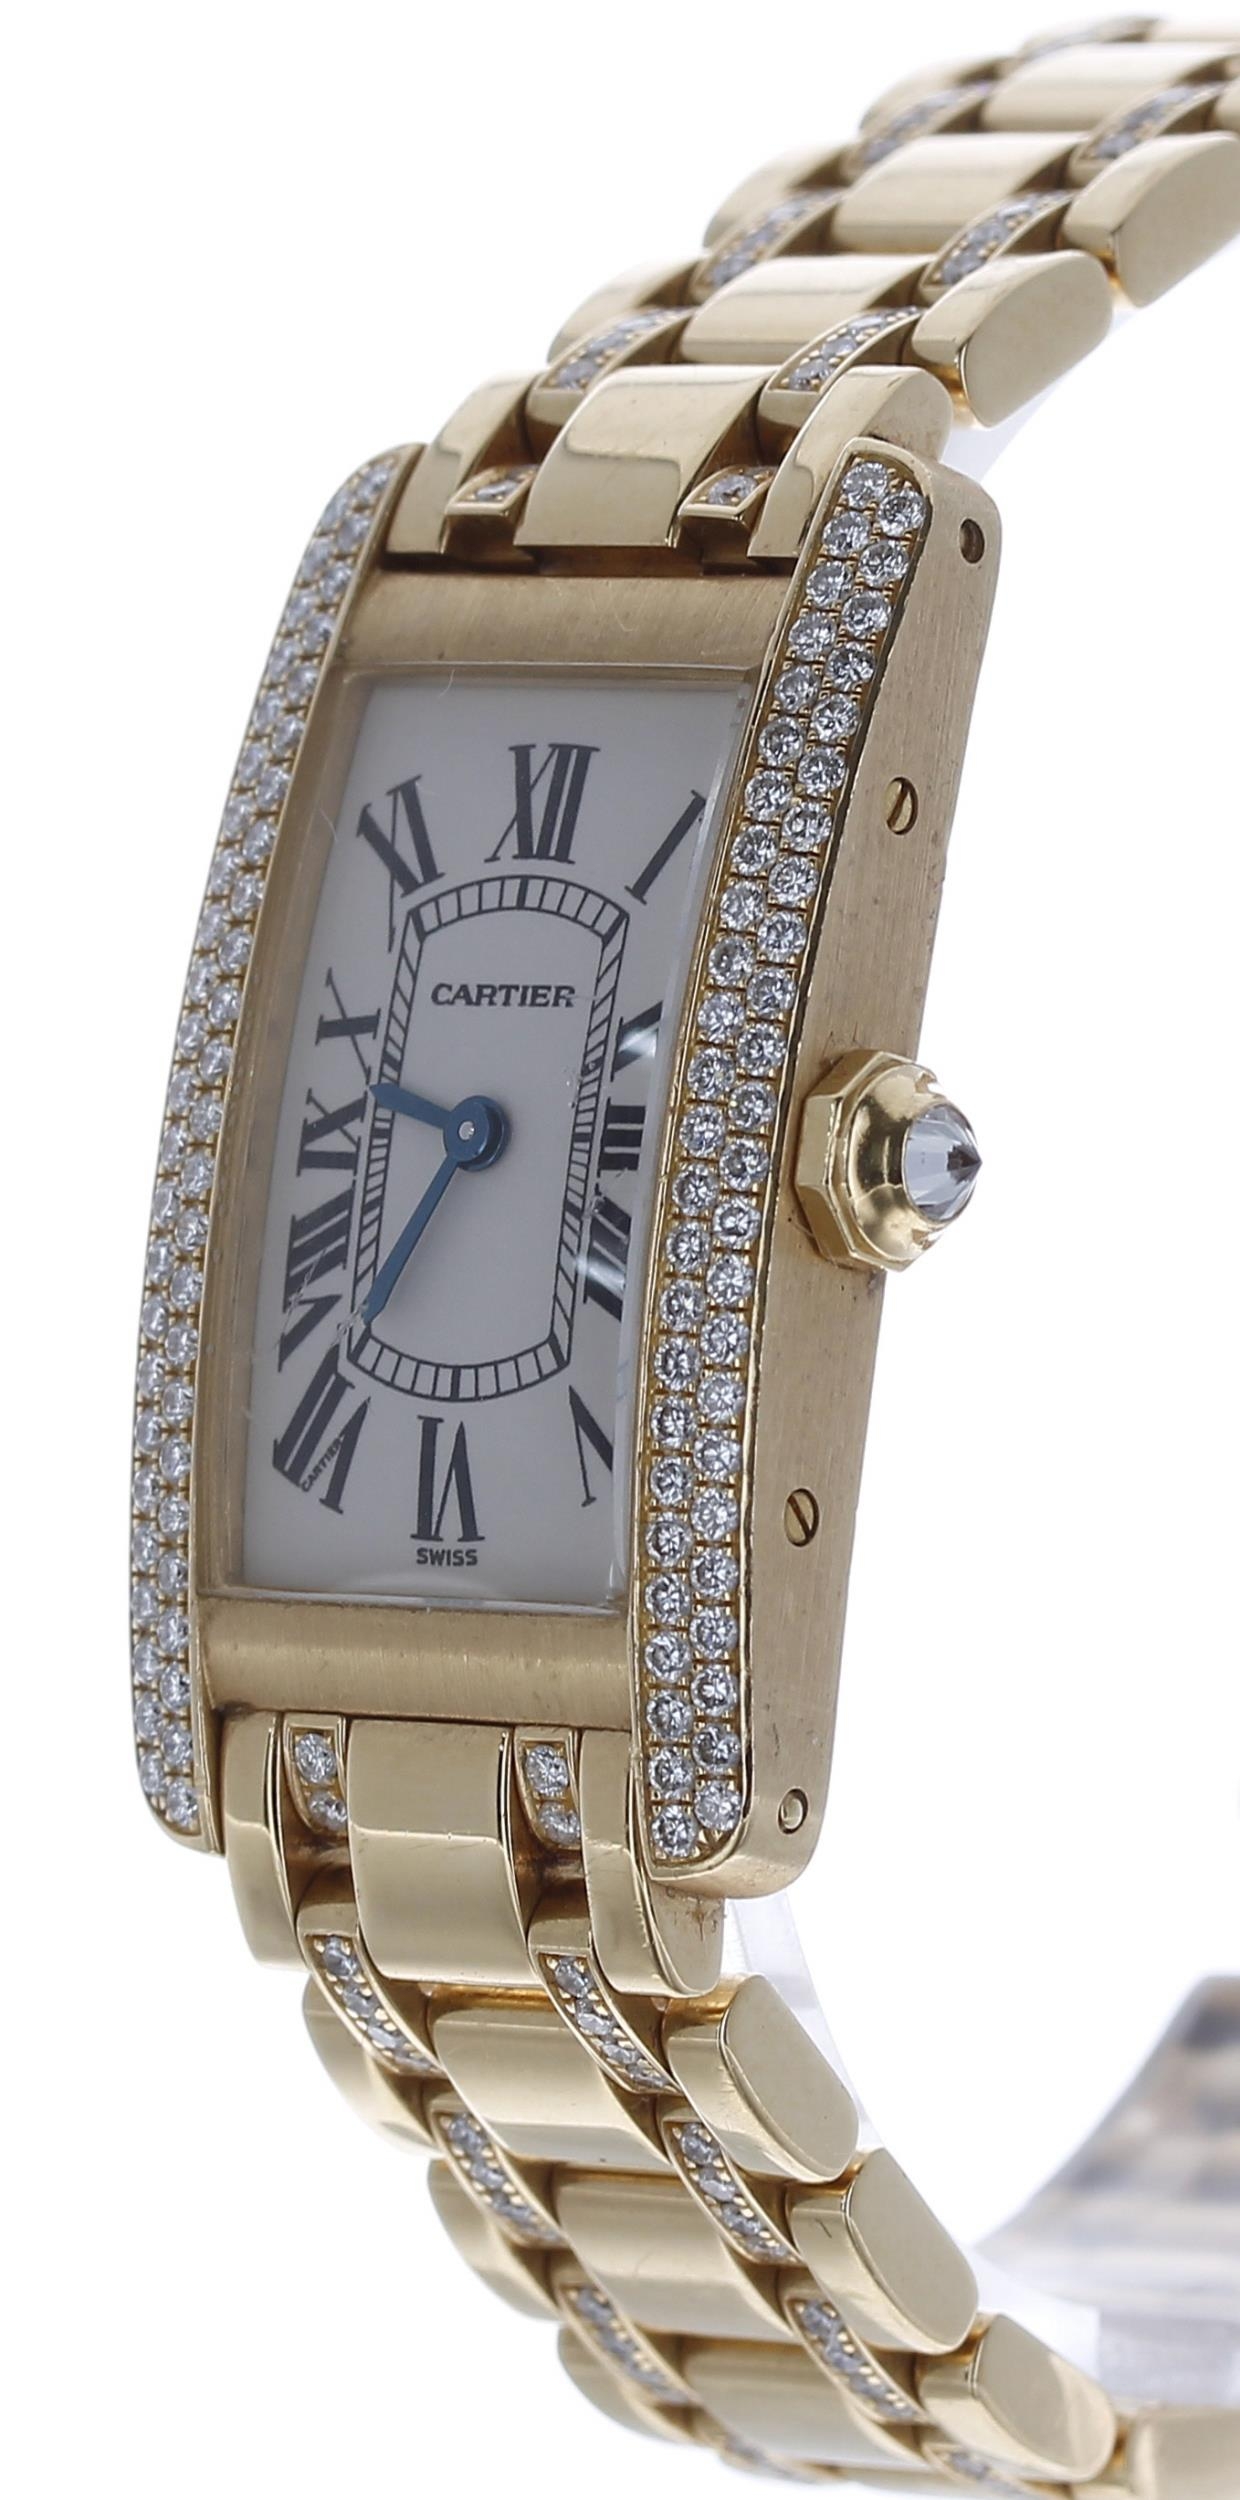 Cartier Tank Americaine 18ct and diamond lady's wristwatch, reference no.1710, serial no. - Image 2 of 5